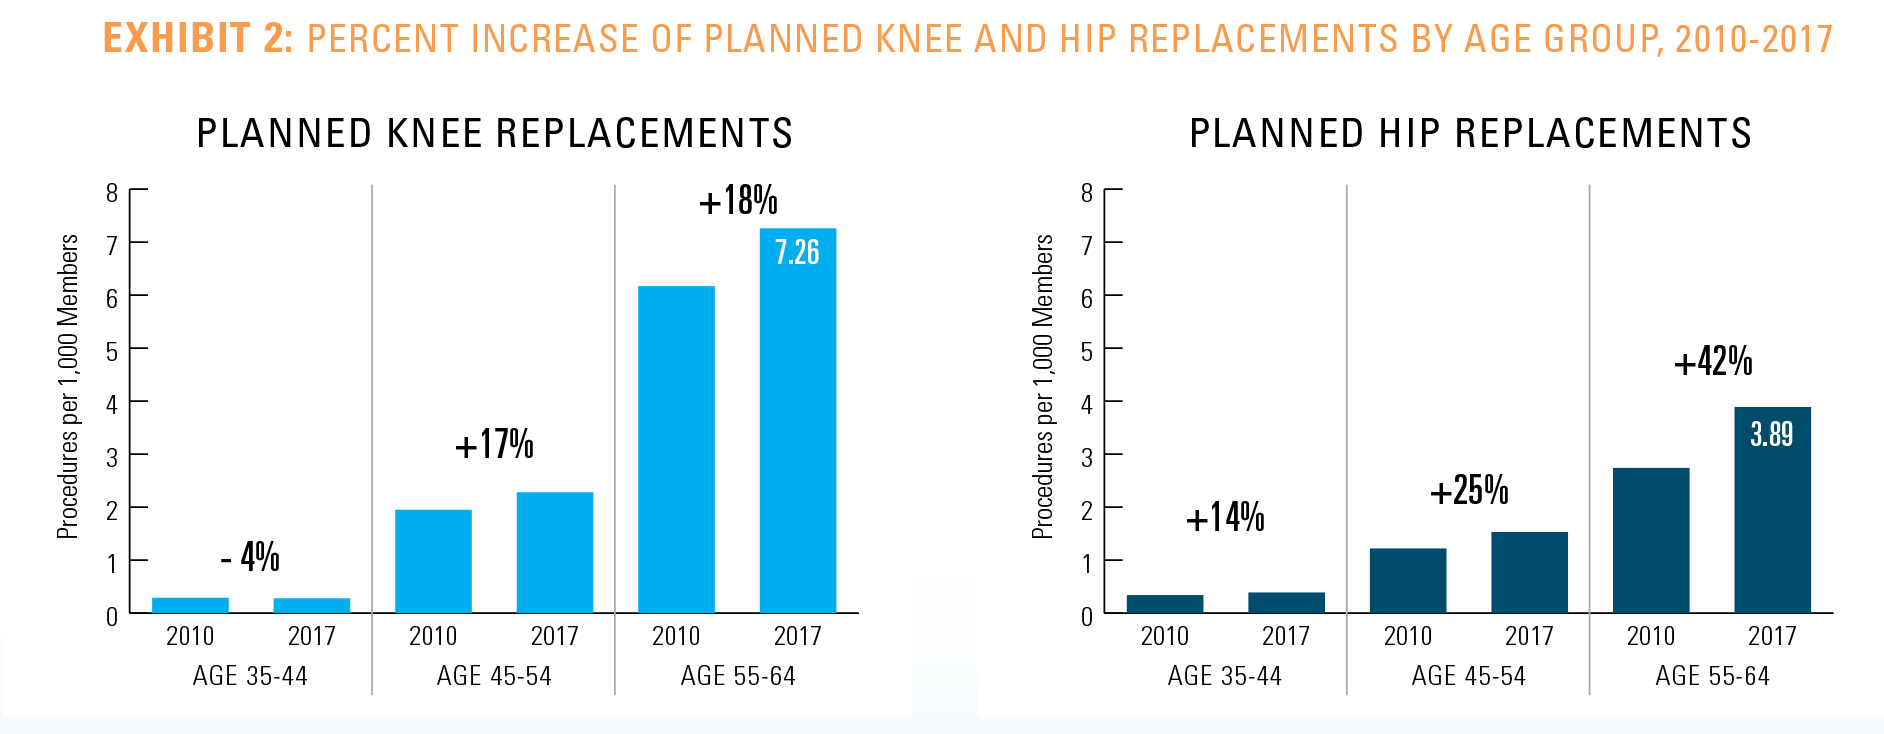 EXHIBIT 2: PERCENT INCREASE OF PLANNED KNEE AND HIP REPLACEMENTS BY AGE GROUP, 2010-2017